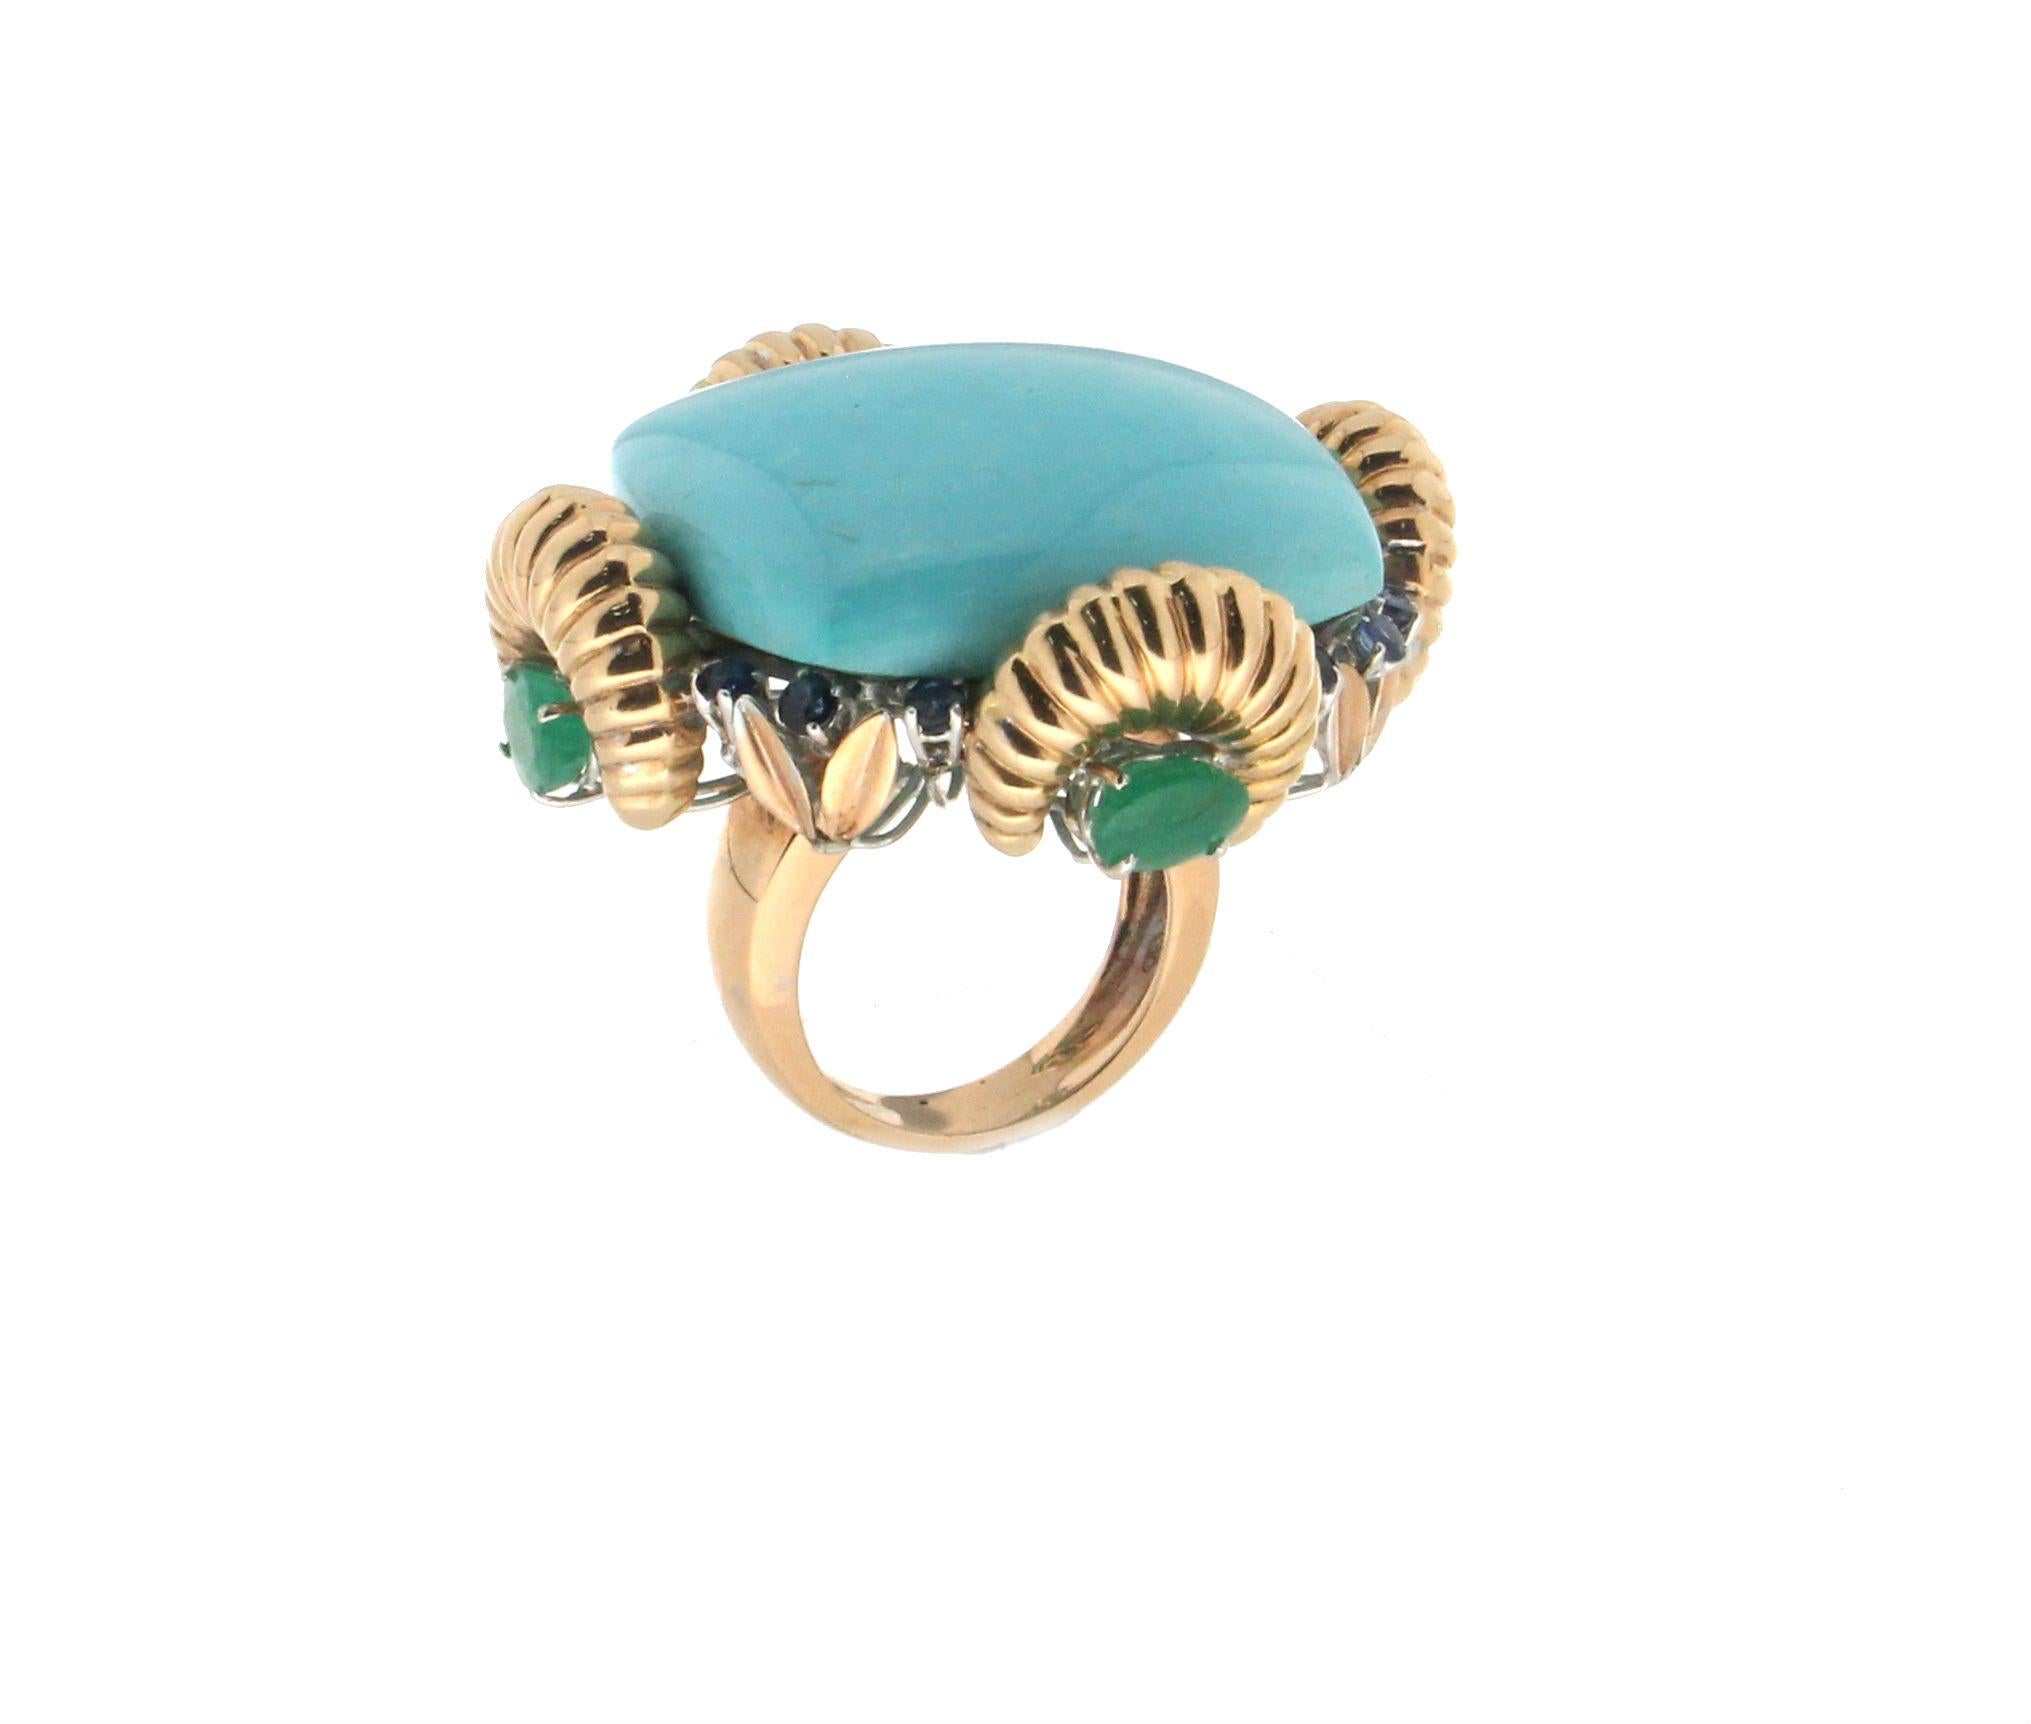 Turquoise(from Arizona) 18 karat yellow gold mounted with emerald,sapphires cocktail ring

Ring weight 44 grams
Emerald weight 3.34 karat
Sapphires weight 1.25 karat
Ring size 8.25 Us 17.50 ita

